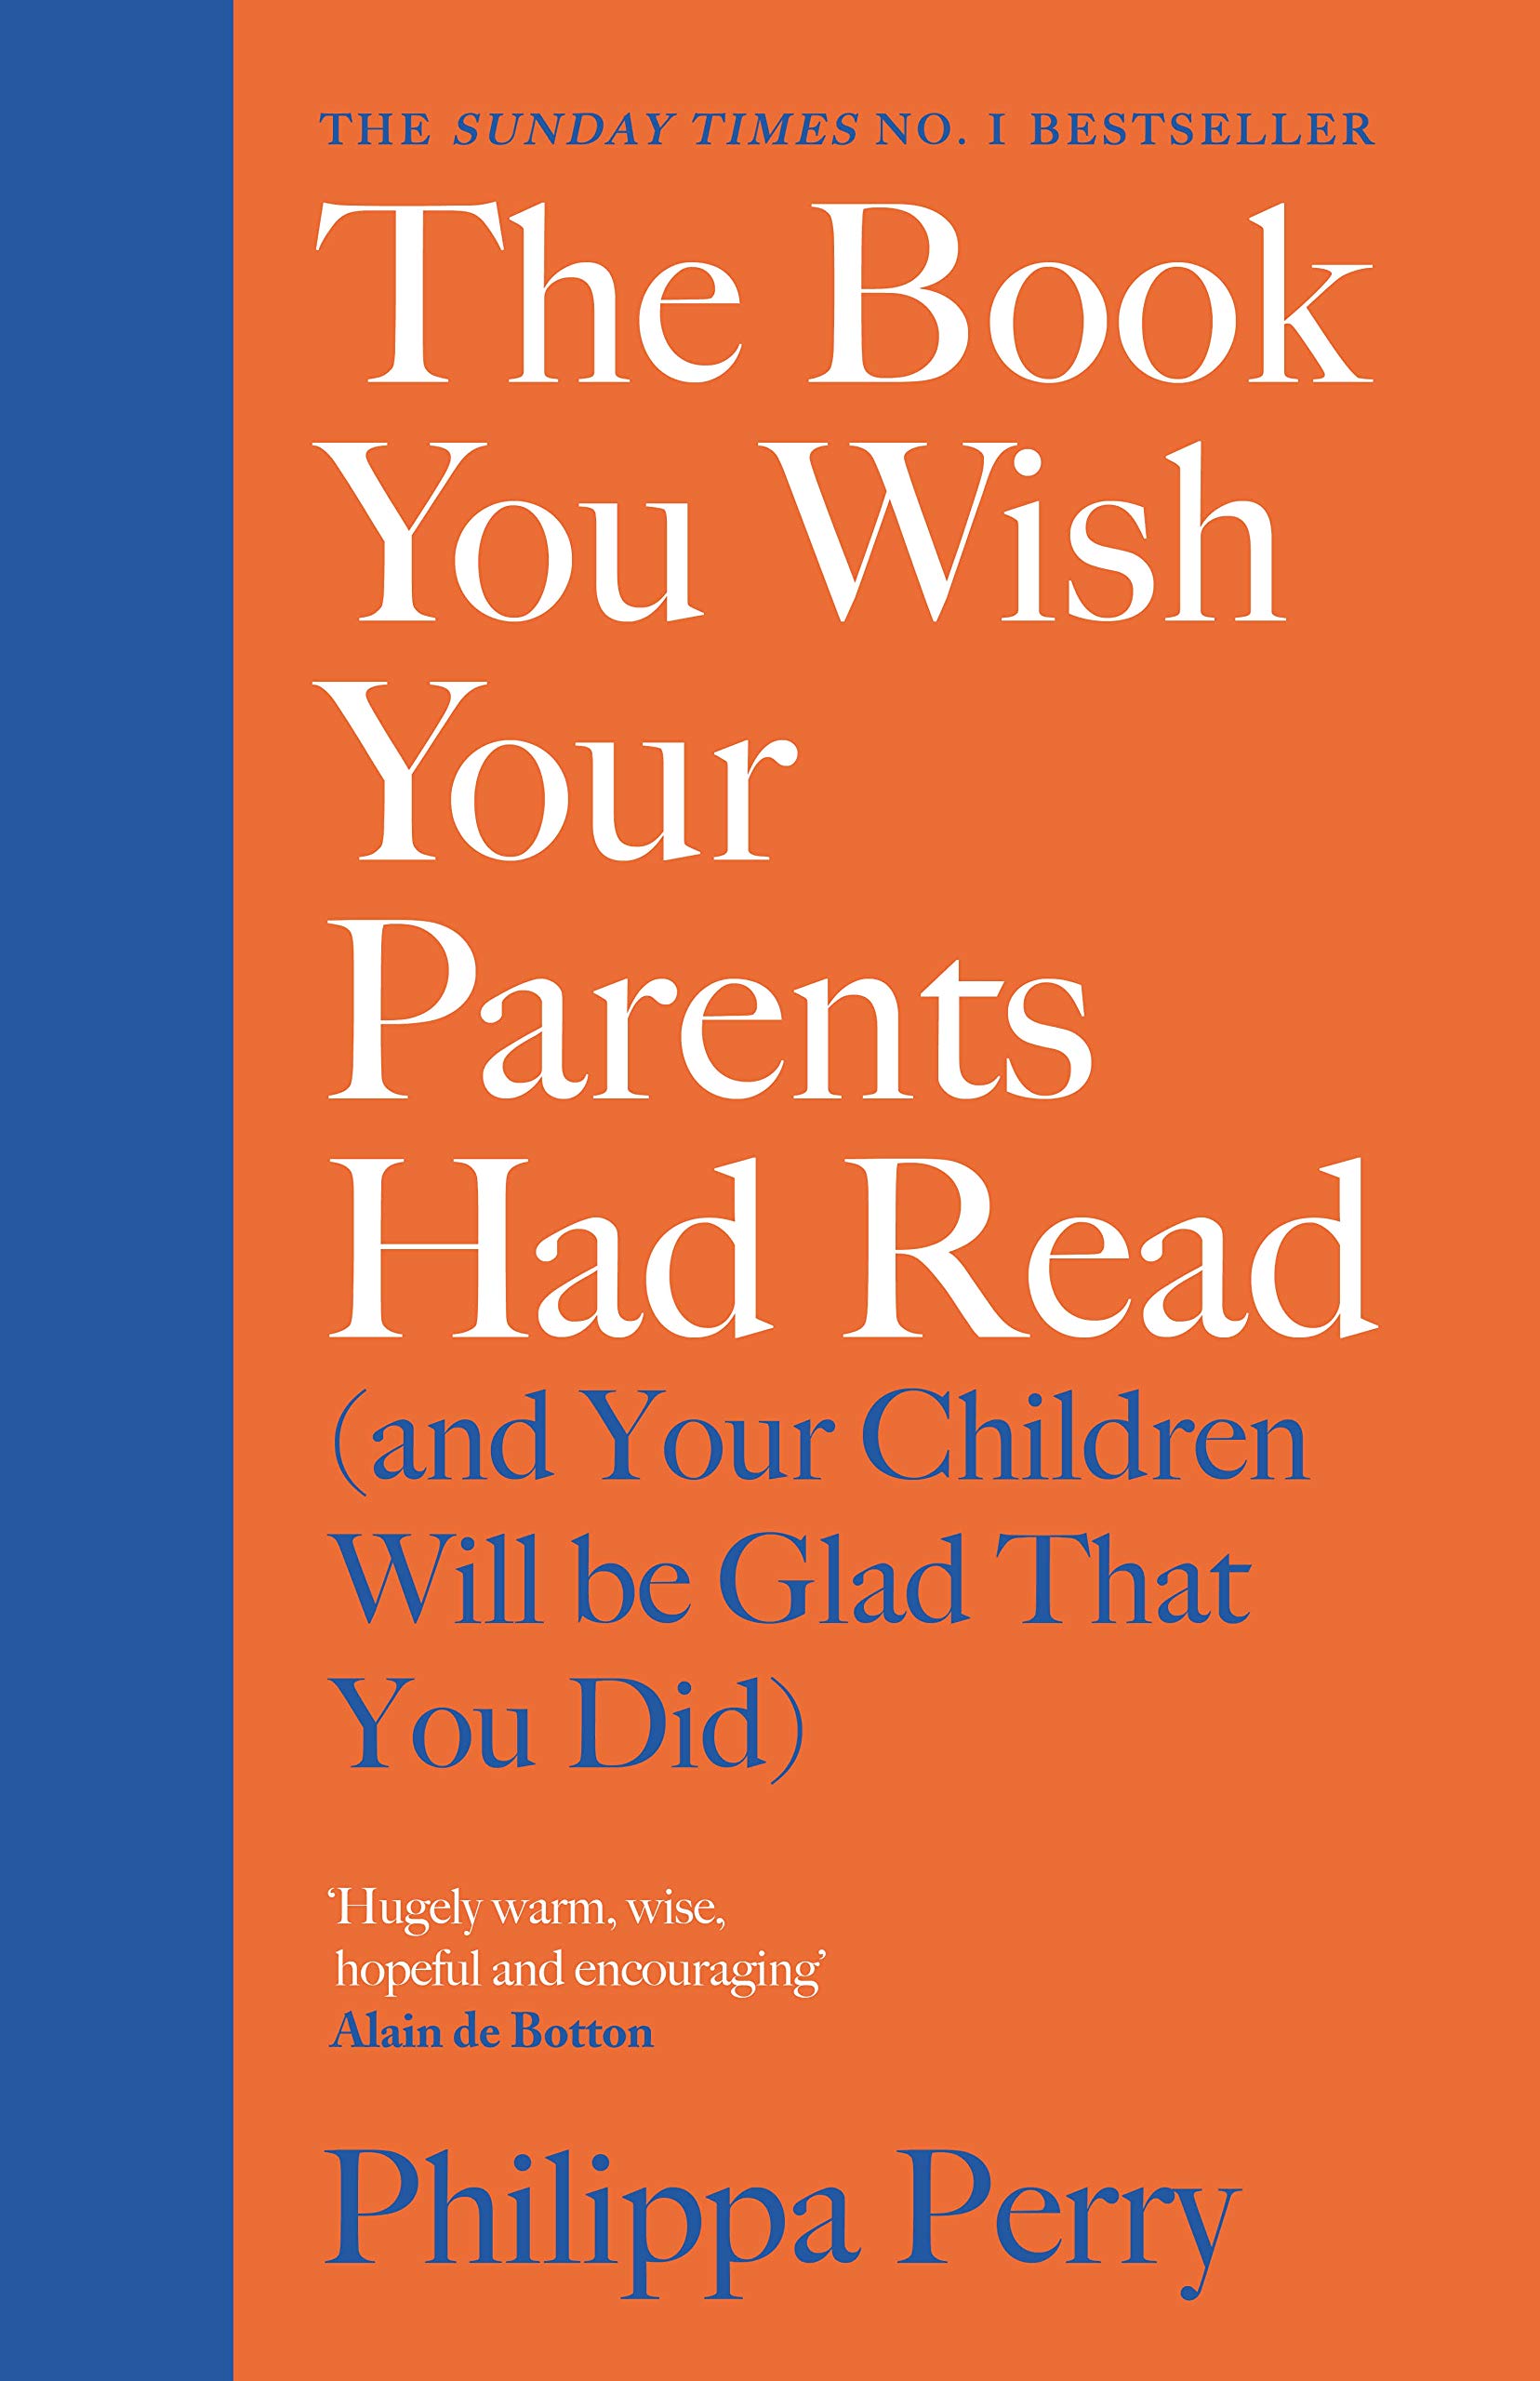 The book you wish your parents had read by Philippa Perry